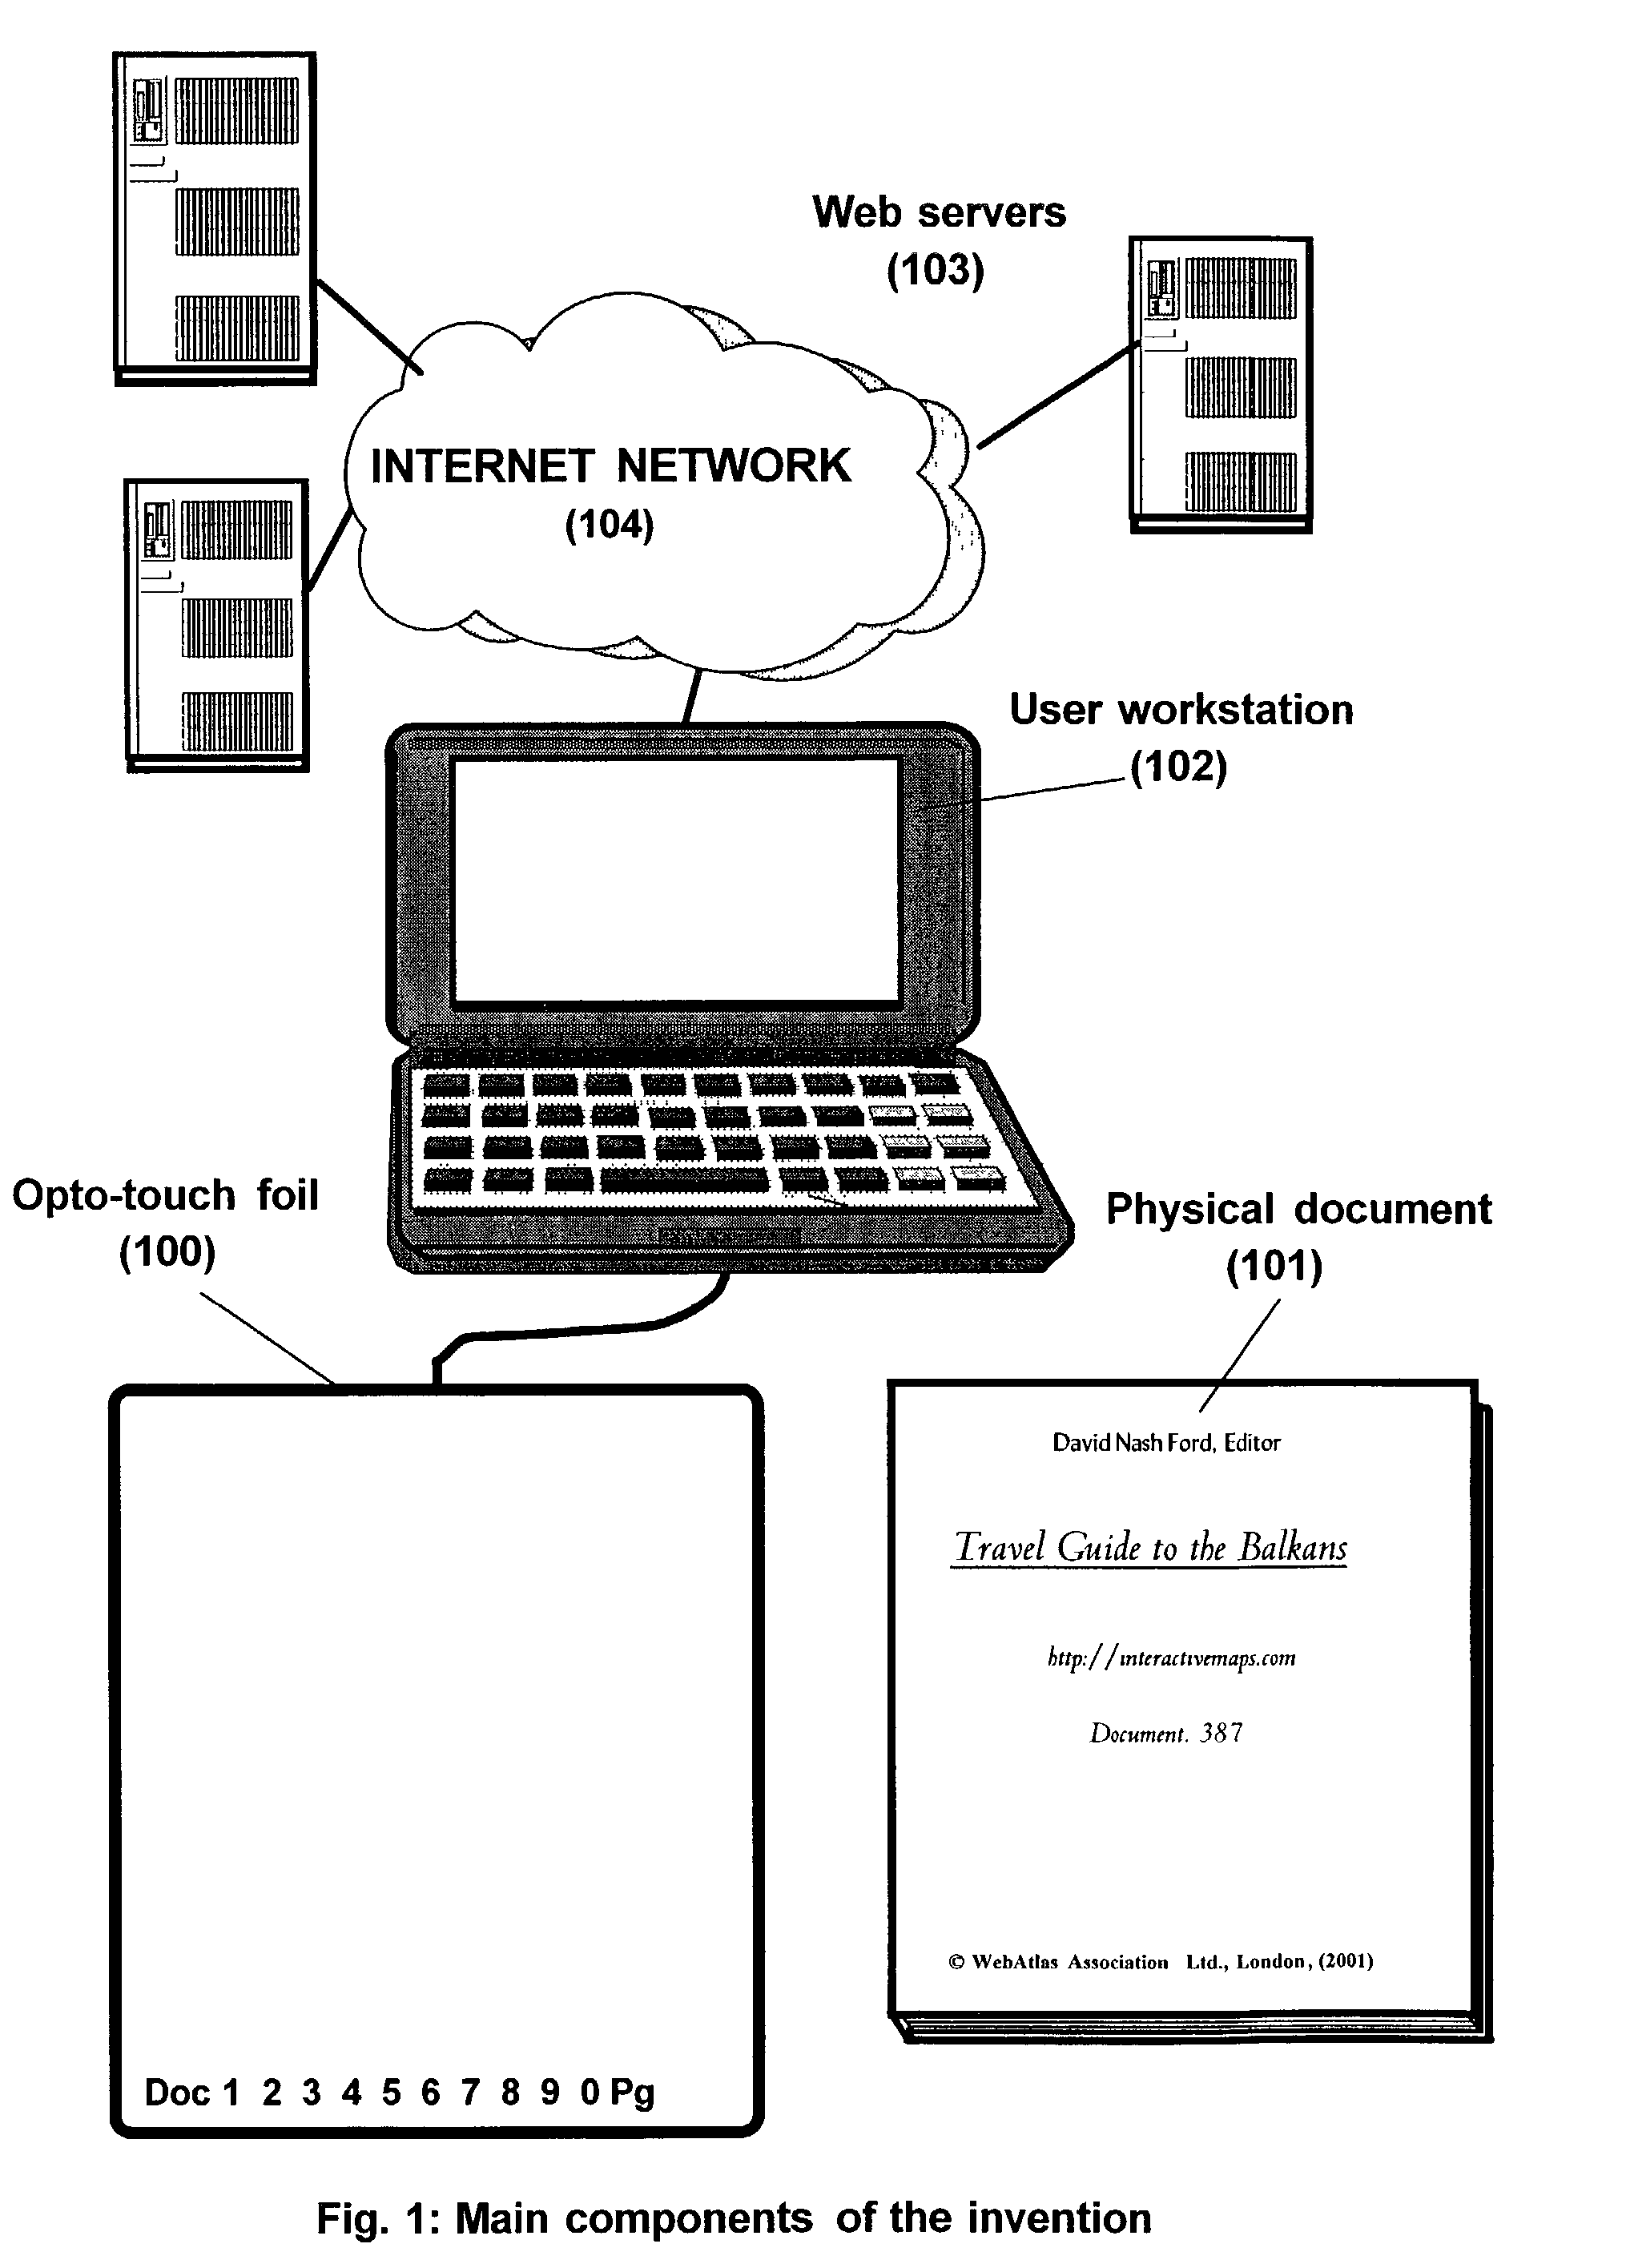 System and method for locating on electronic documents items referenced in a physical document